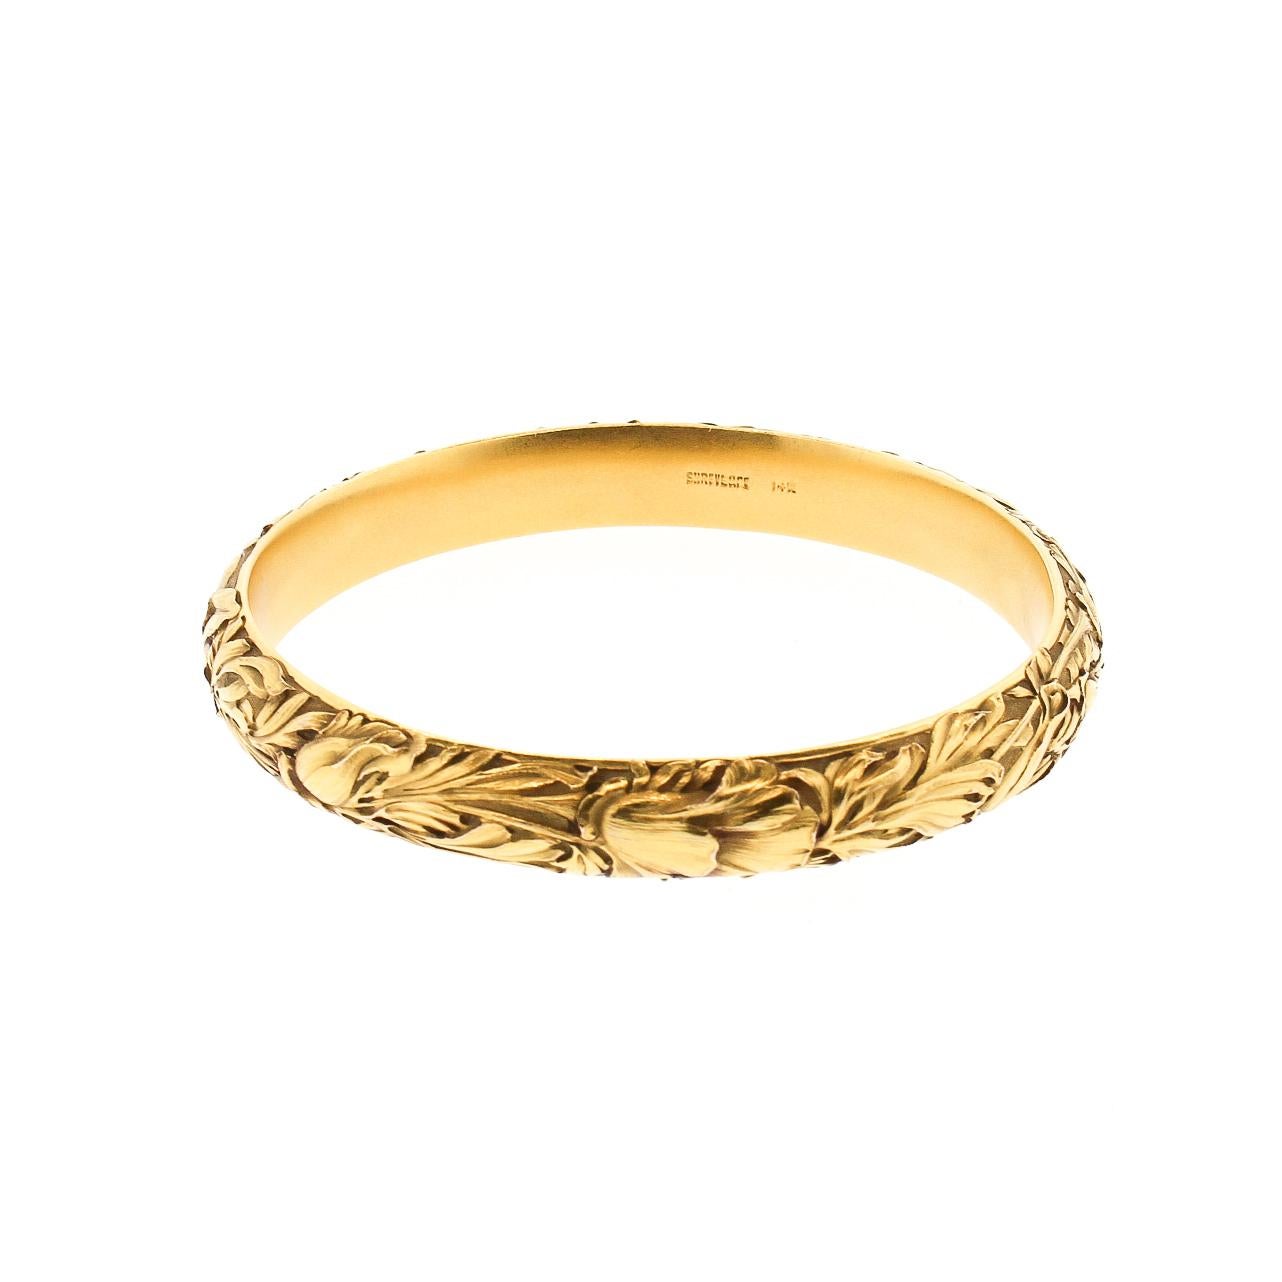 A beautifully engraved 14k yellow gold Art Nouveau bangle bracelet by Shreve and Co. The bracelet has iris and leaves and branches deeply engraved into the 14k. The motif is purely Art Nouveau, with the appreciation of nature. The bracelet is hollow